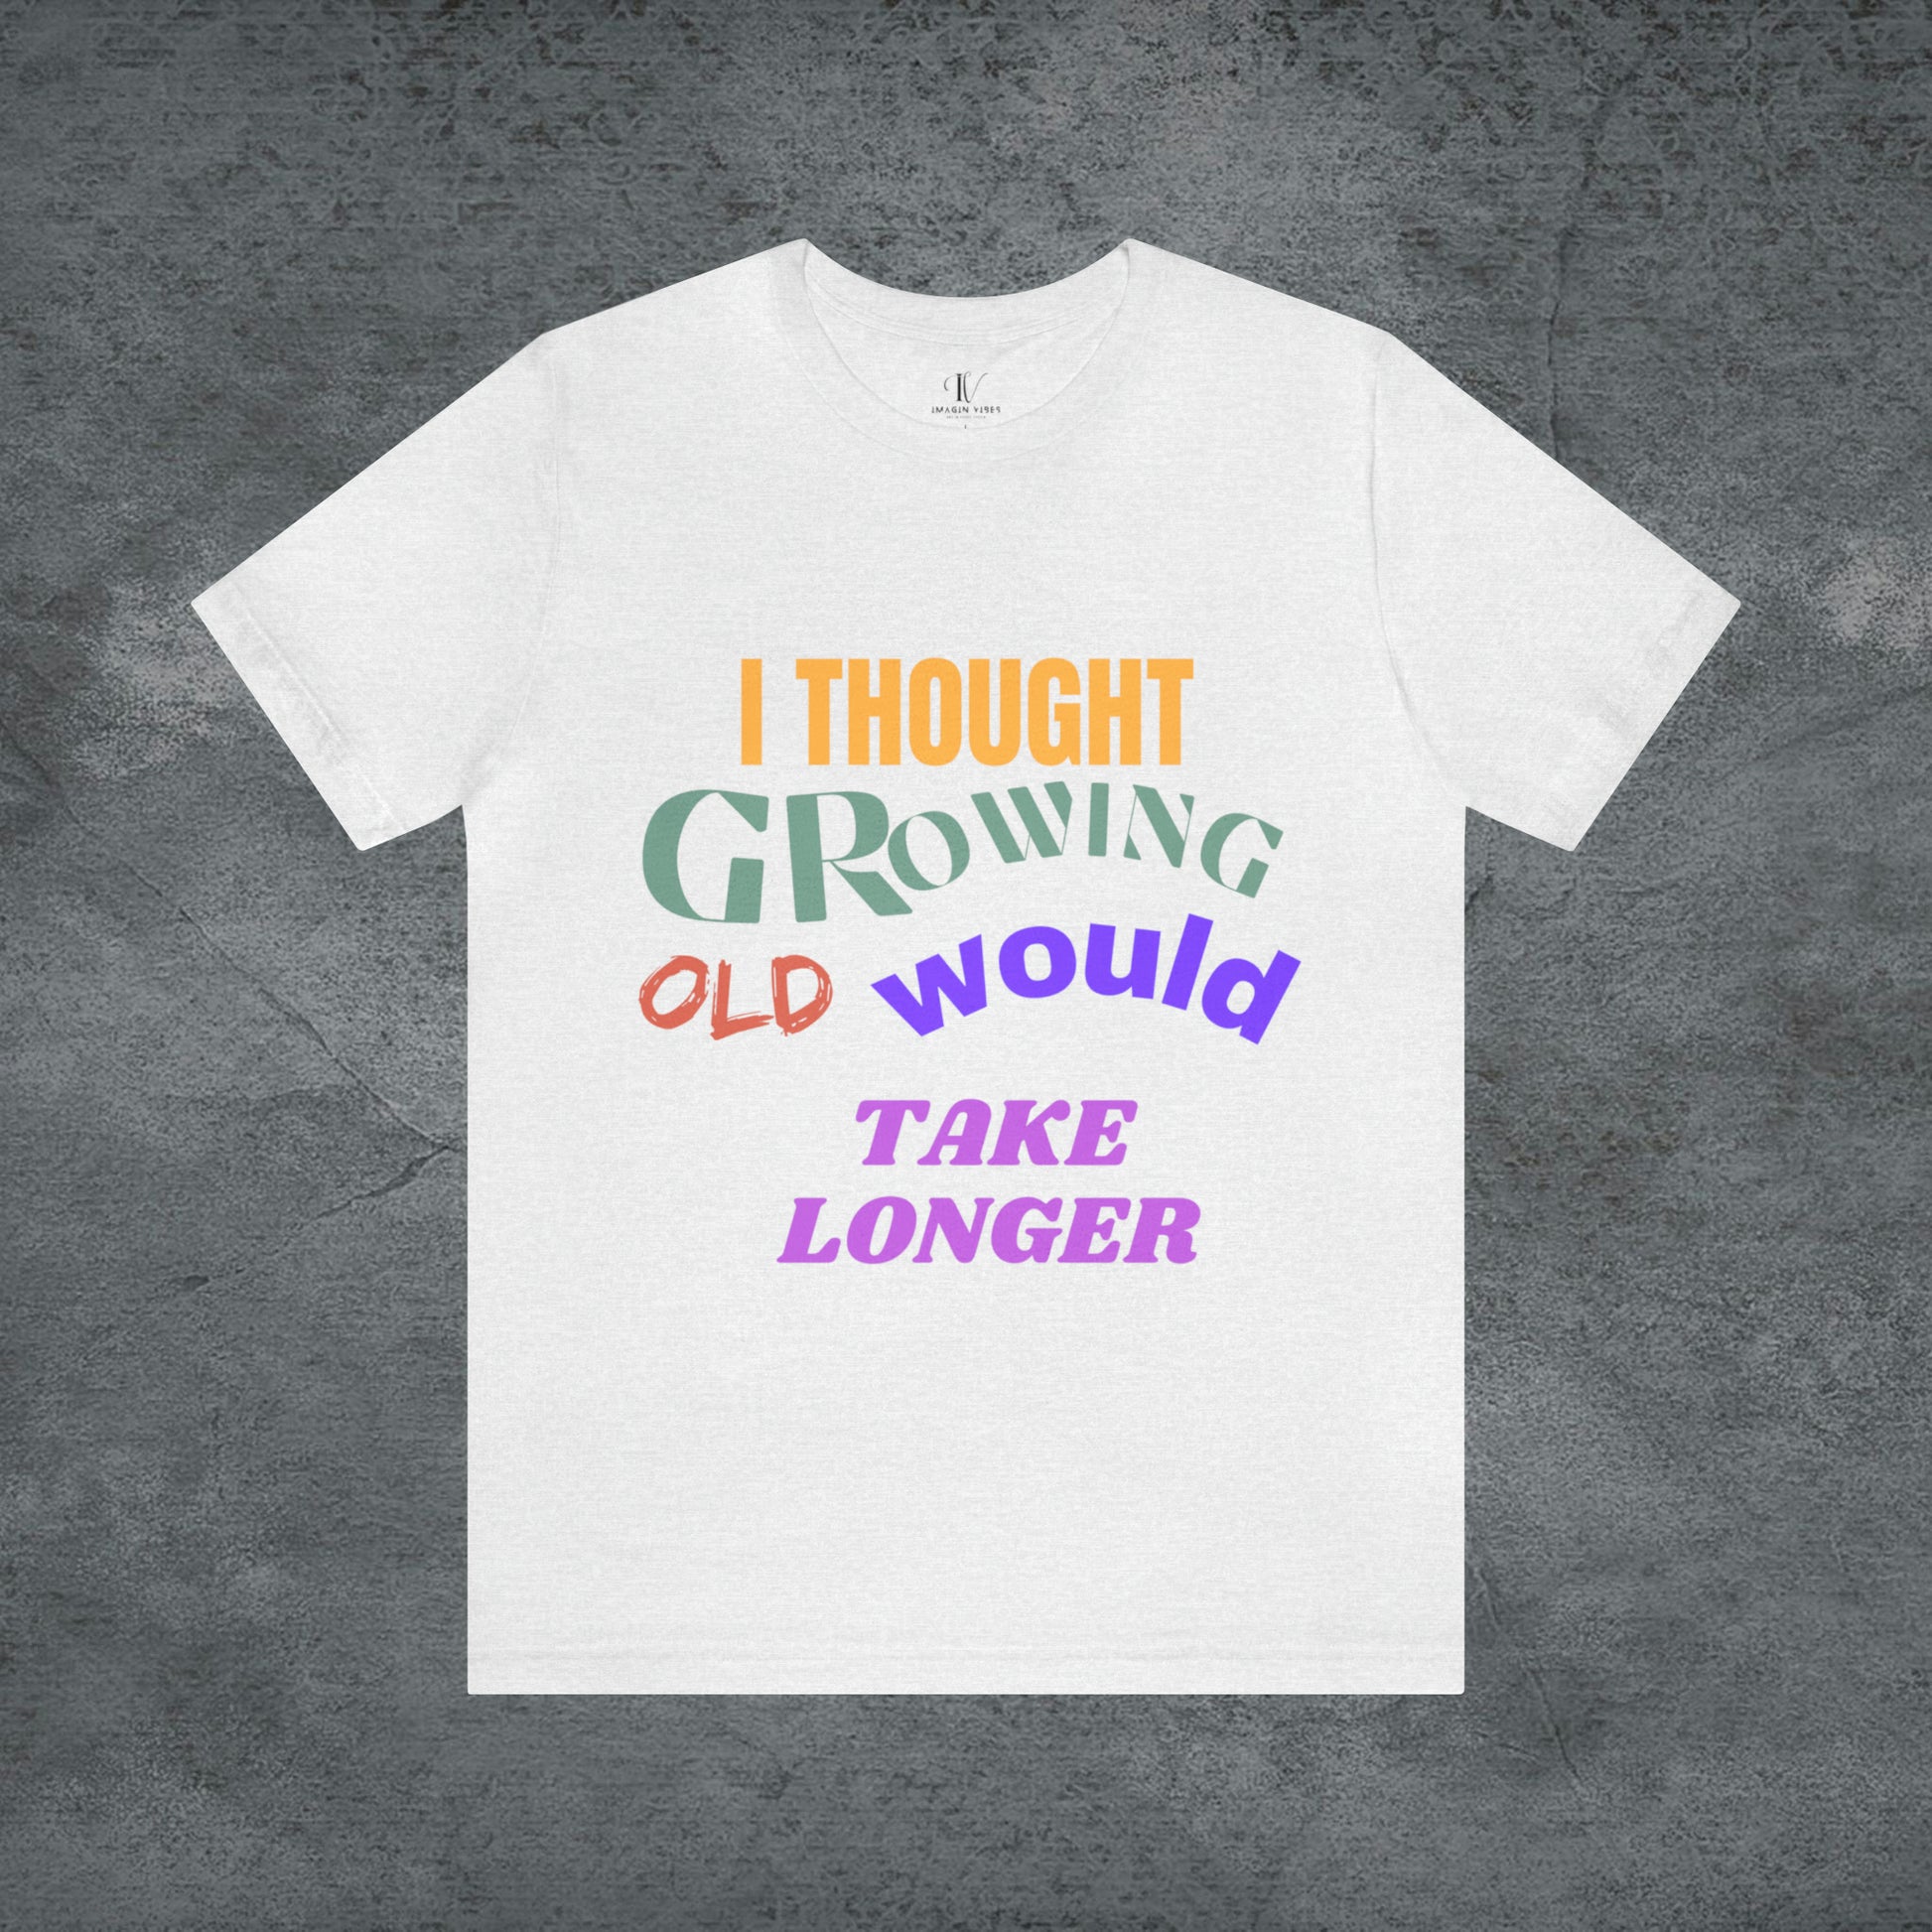 I Thought Growing Old Would Take Longer T-Shirt - Getting Older T-Shirt - Funny Adulting Tee - Old Age T-Shirt - Old Person T-Shirt T-Shirt Ash S 